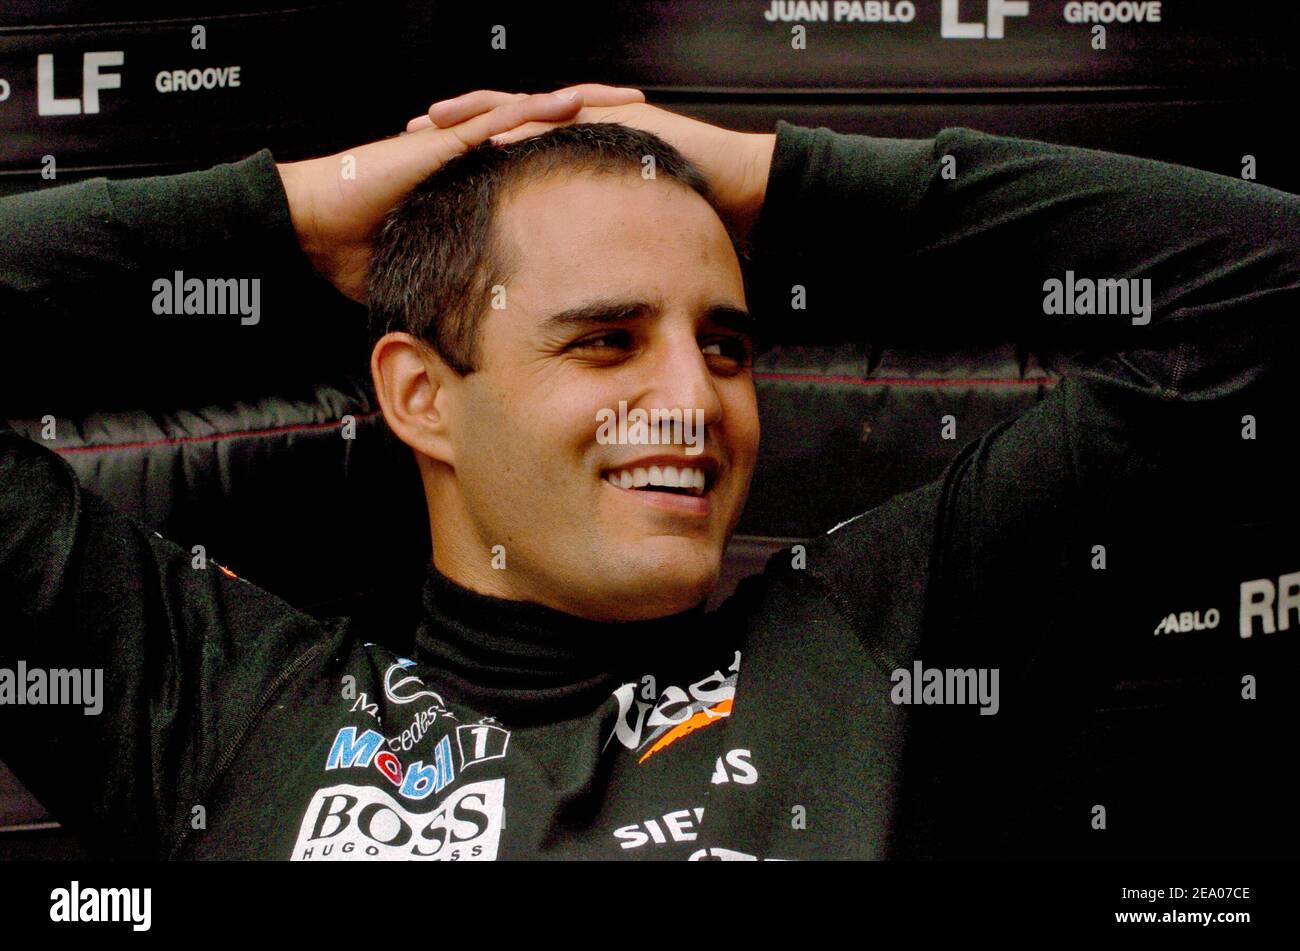 Colombian Formula 1 driver Juan Pablo Montoya (team McLaren Mercedes) during the first Formula 1 Grand Prix in Melbourne , Australia, on March 04, 2005. Photo by Thierry Gromik/ABACA Stock Photo